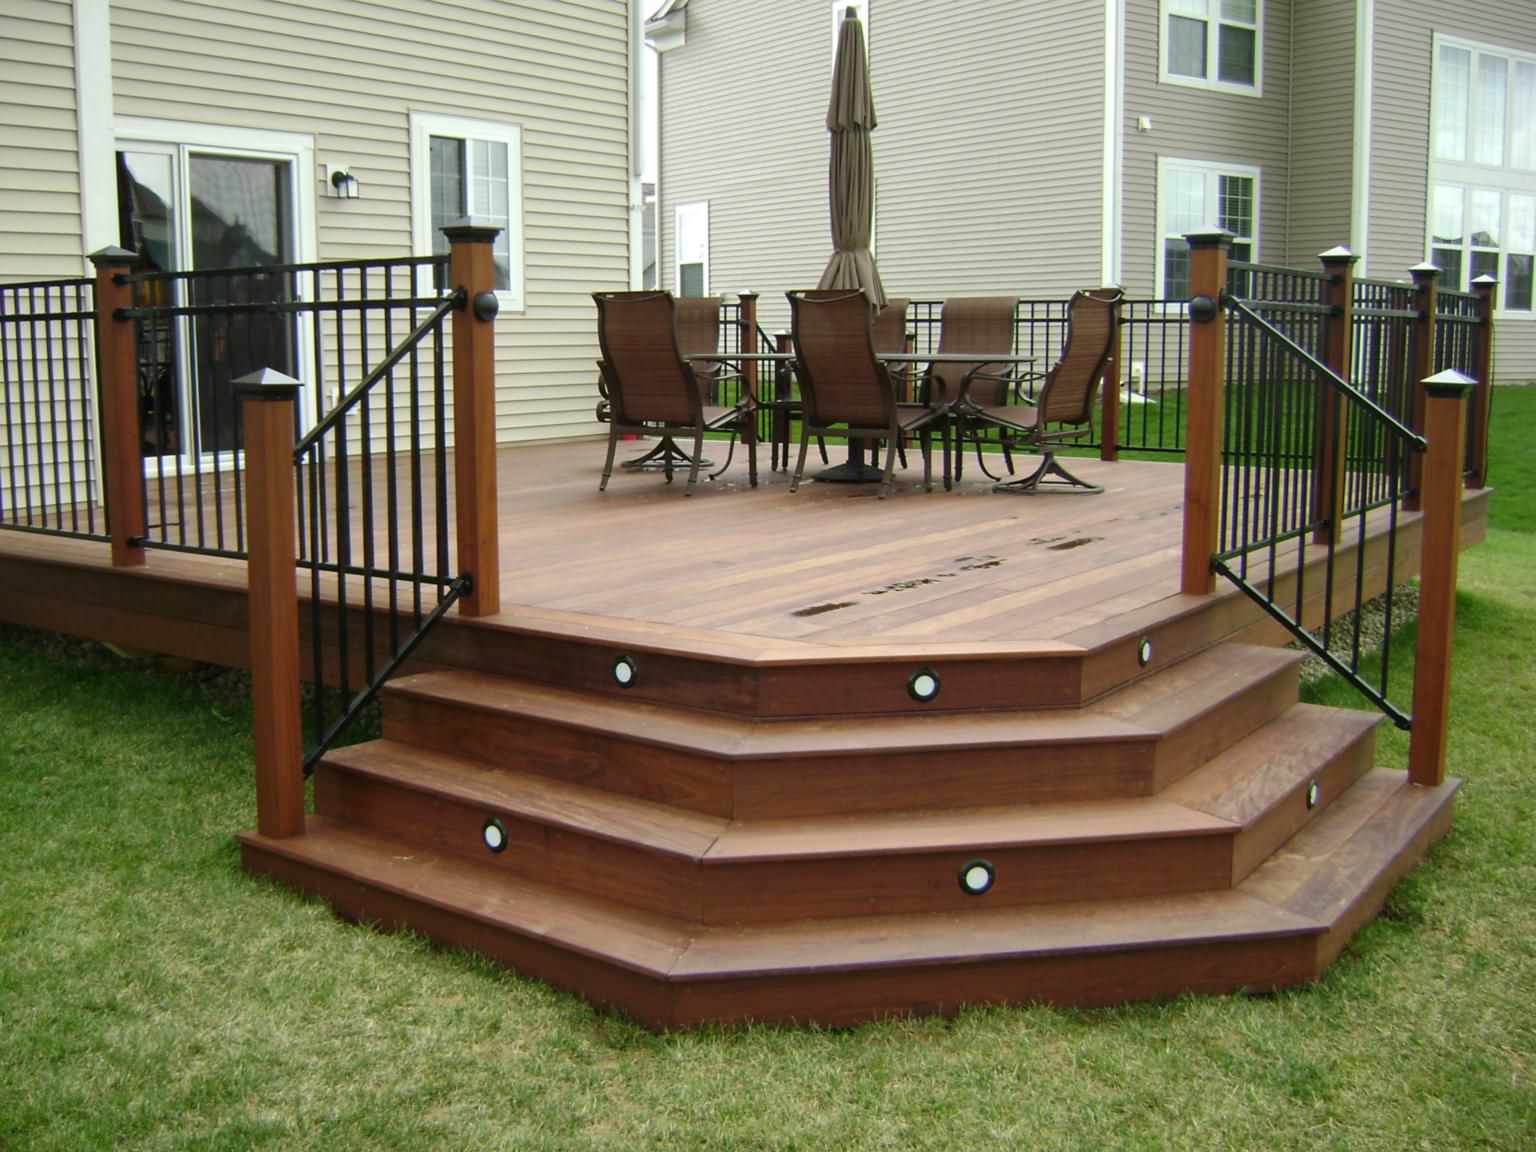 Outdoor Prefab Deck Stairs - How To Build A Deck Composite Stairs And ...